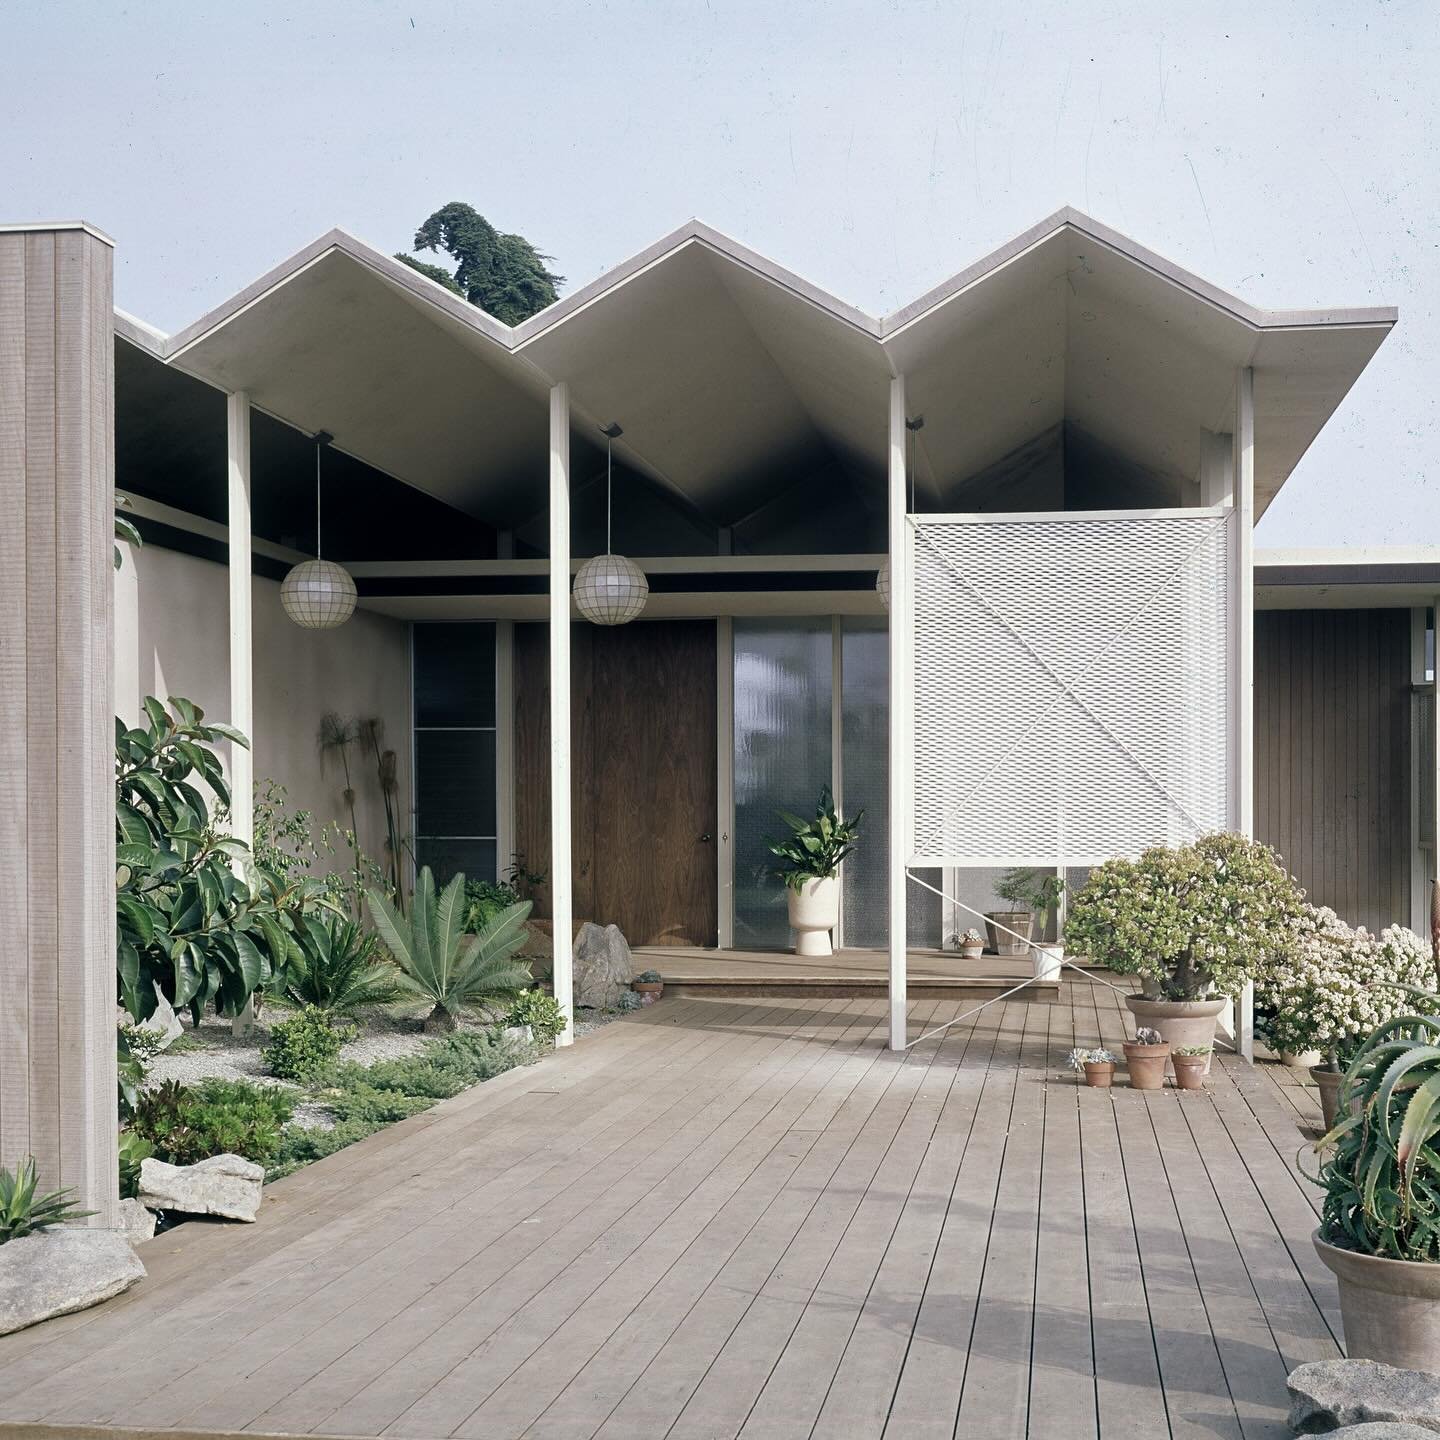 The Charles DuPont Residence by Frederick Liebhardt &amp; Eugene Weston III, circa 1962

Resting on 3.18 sprawling acres of rolling grass hills and 100 year old trees in the peaceful Montecillo neighborhood of Del Mar. 

Lovingly enjoyed and maintain